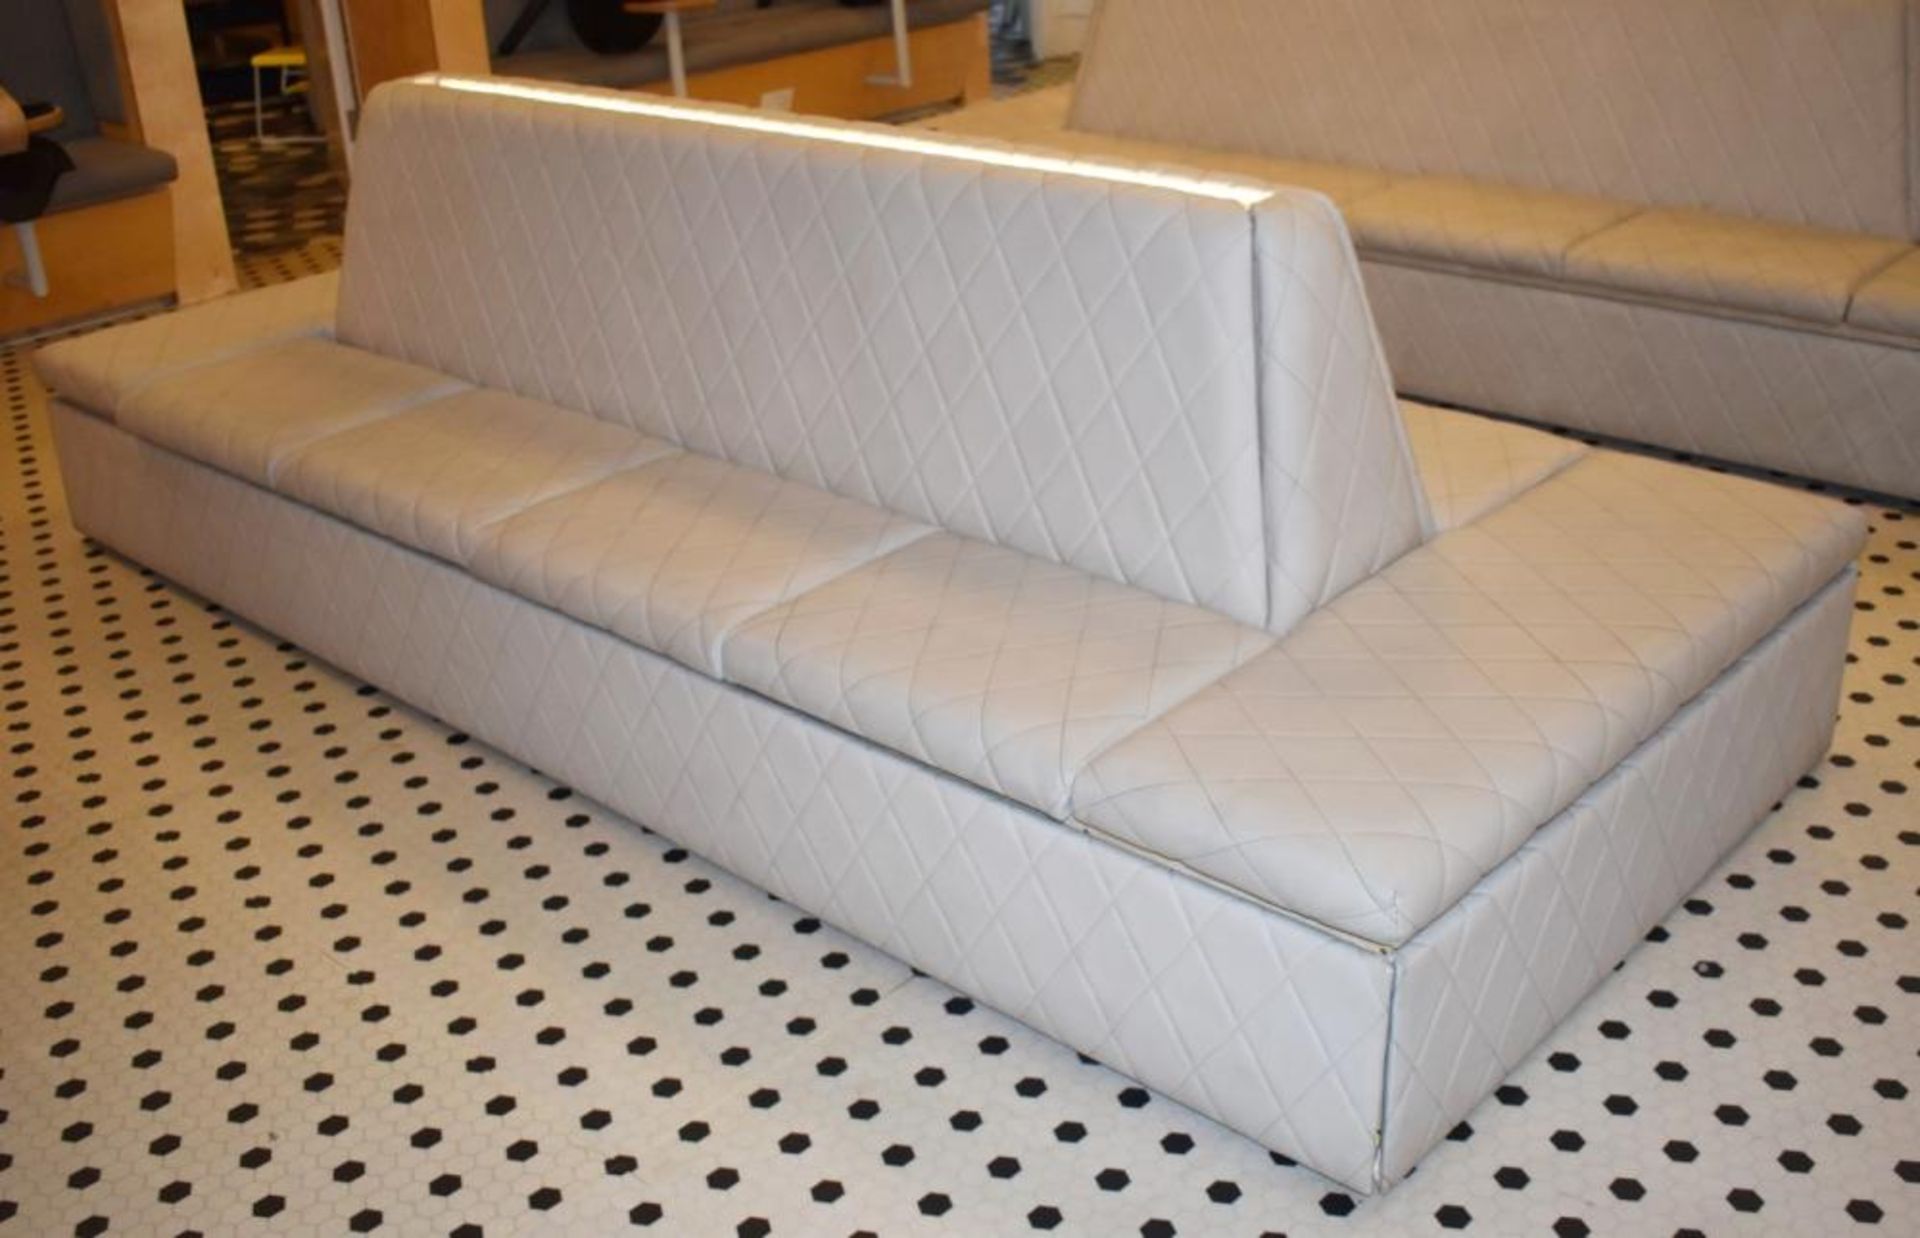 1 x Central Seating Banquette in a Contemporary Diamond Faux Grey Leather - Quality Craftsmanship - Image 7 of 7